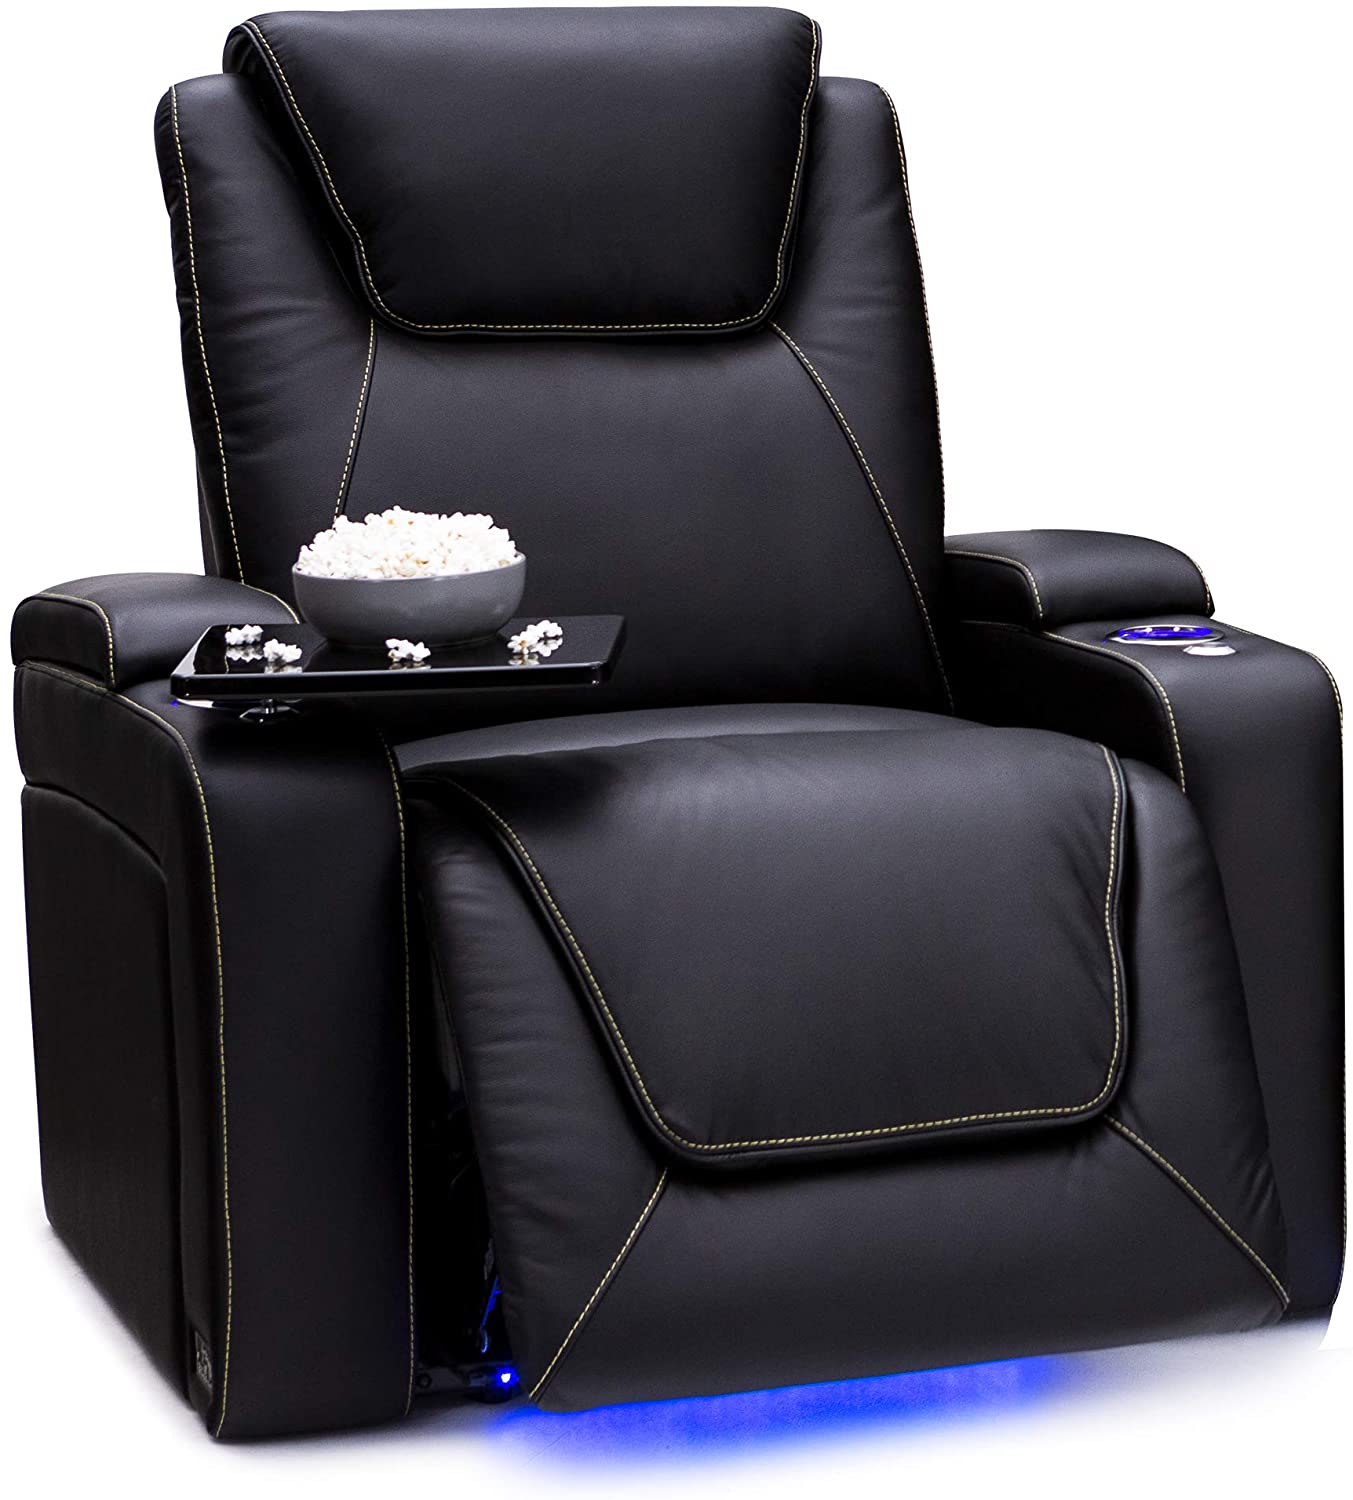 Seatcraft Pantheon Home Theatre Seating Recliner